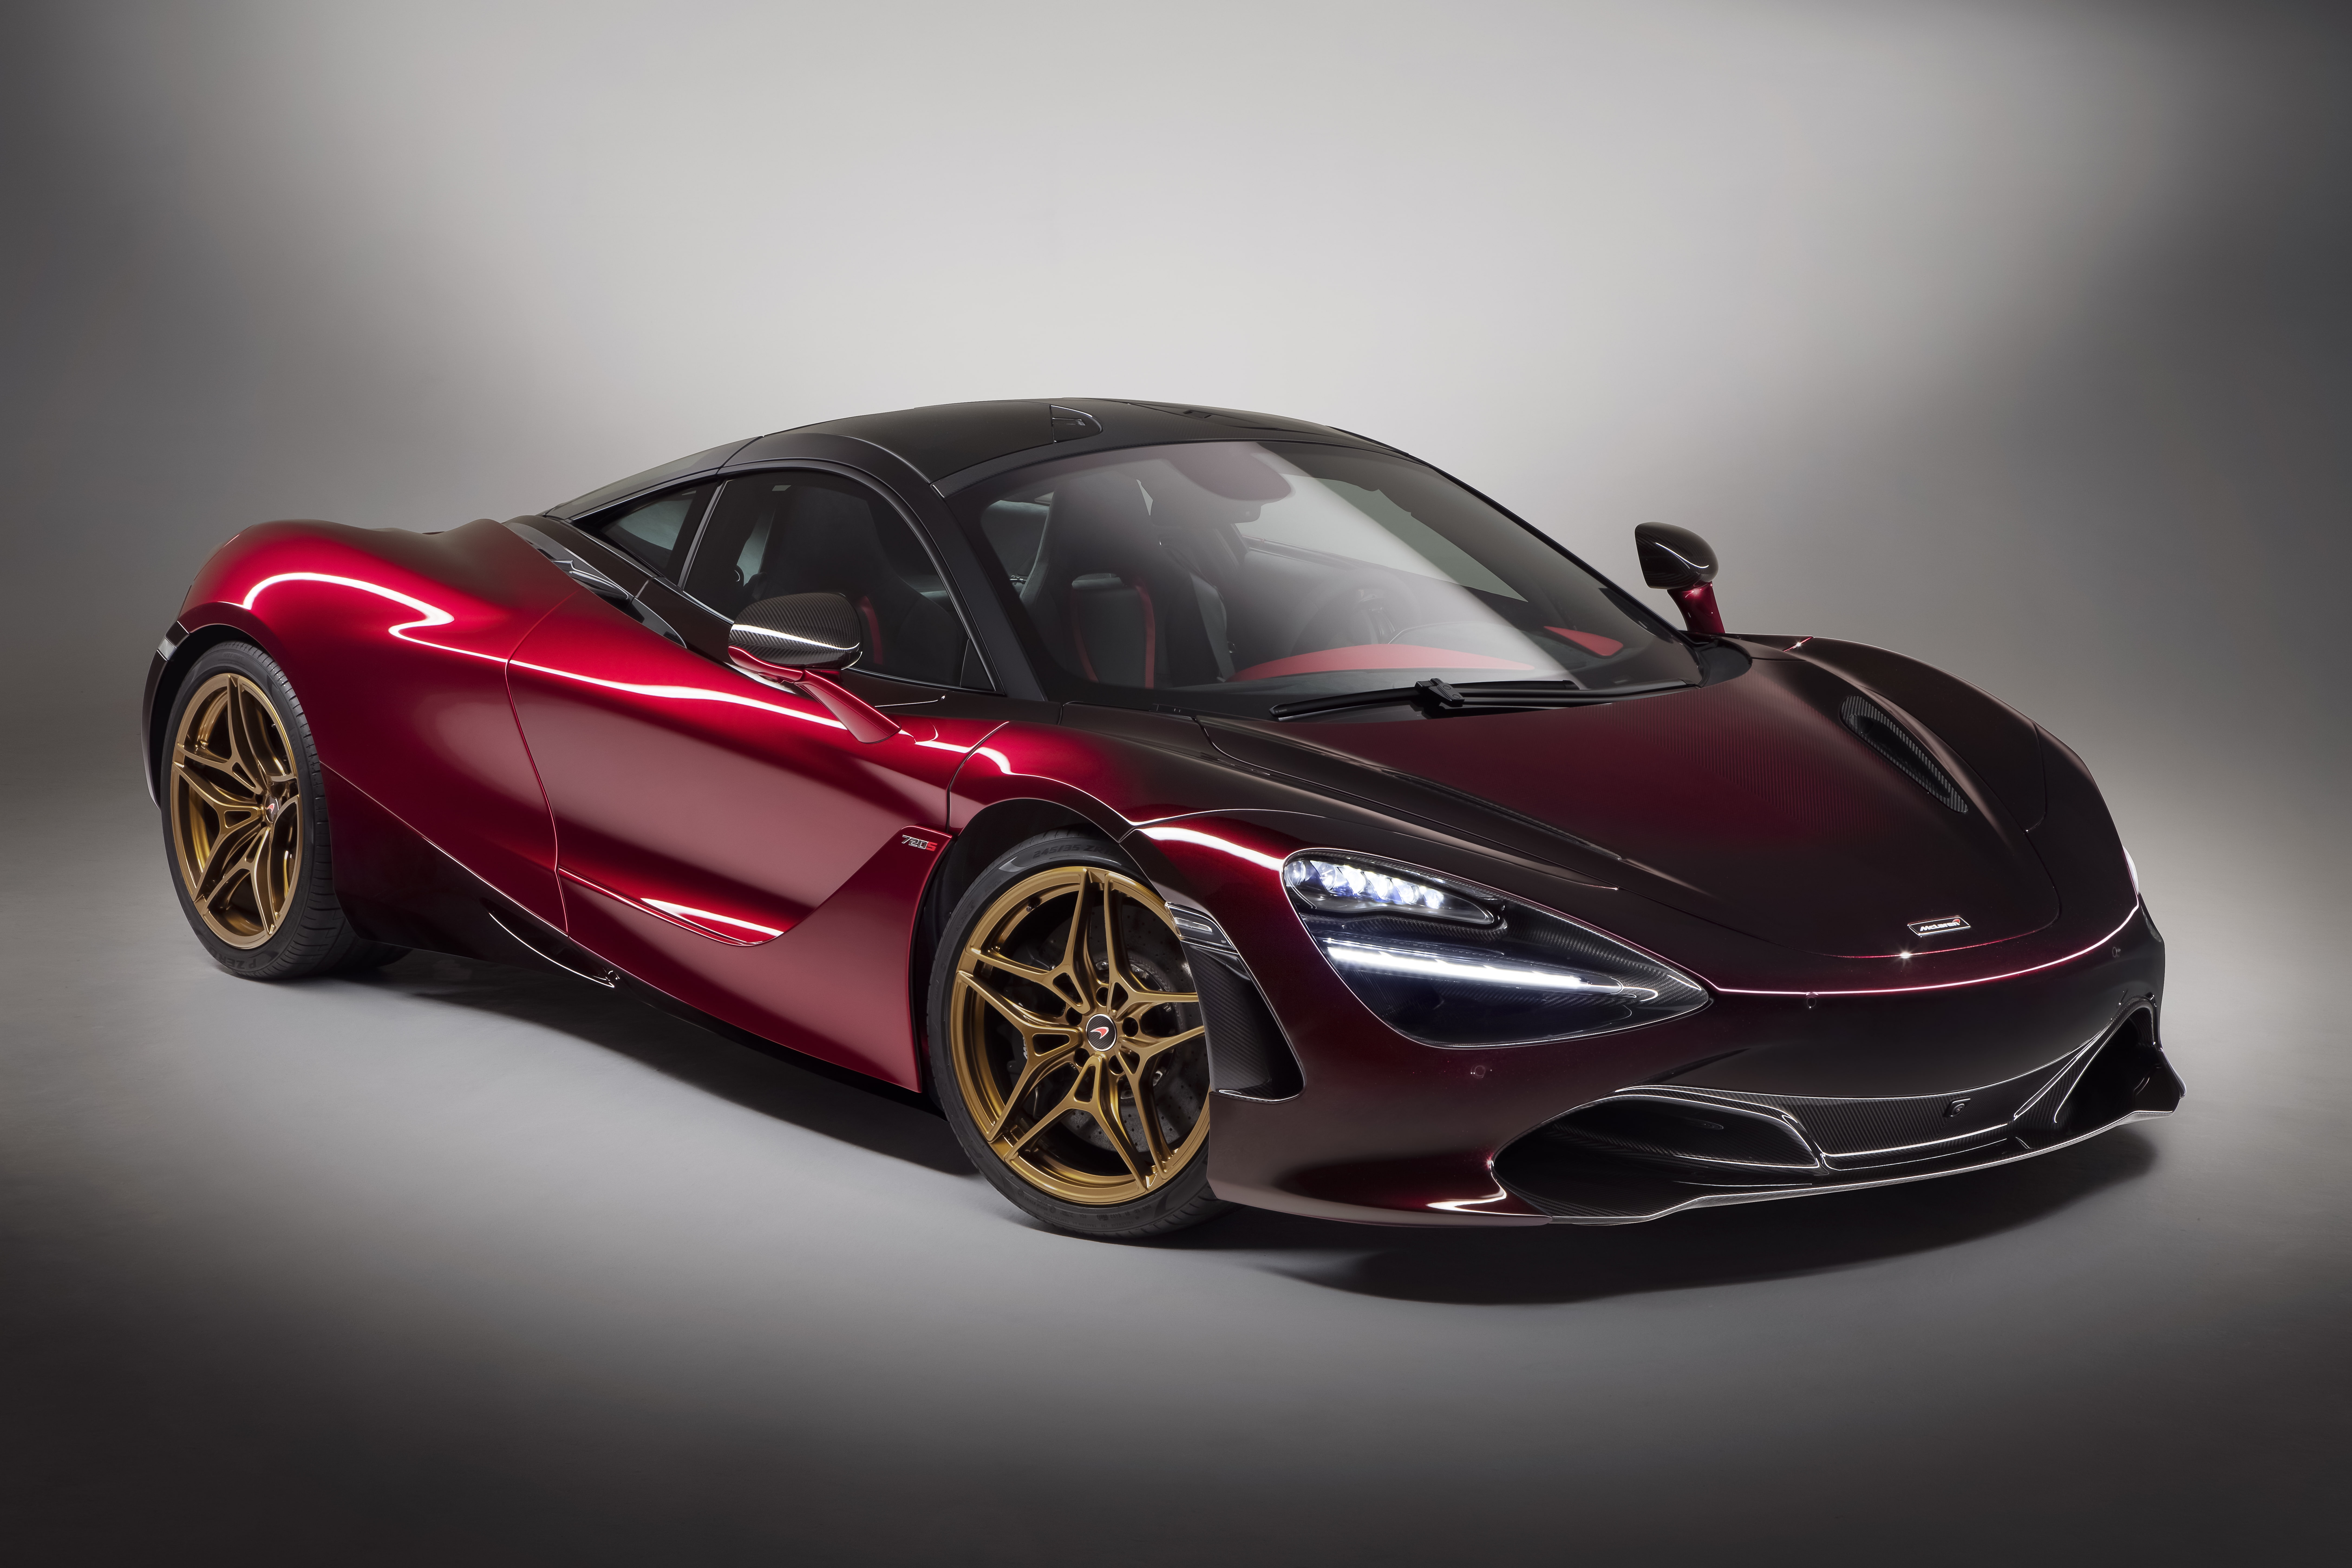 mclaren 720s velocity, side view, cars, supercar, Vehicle